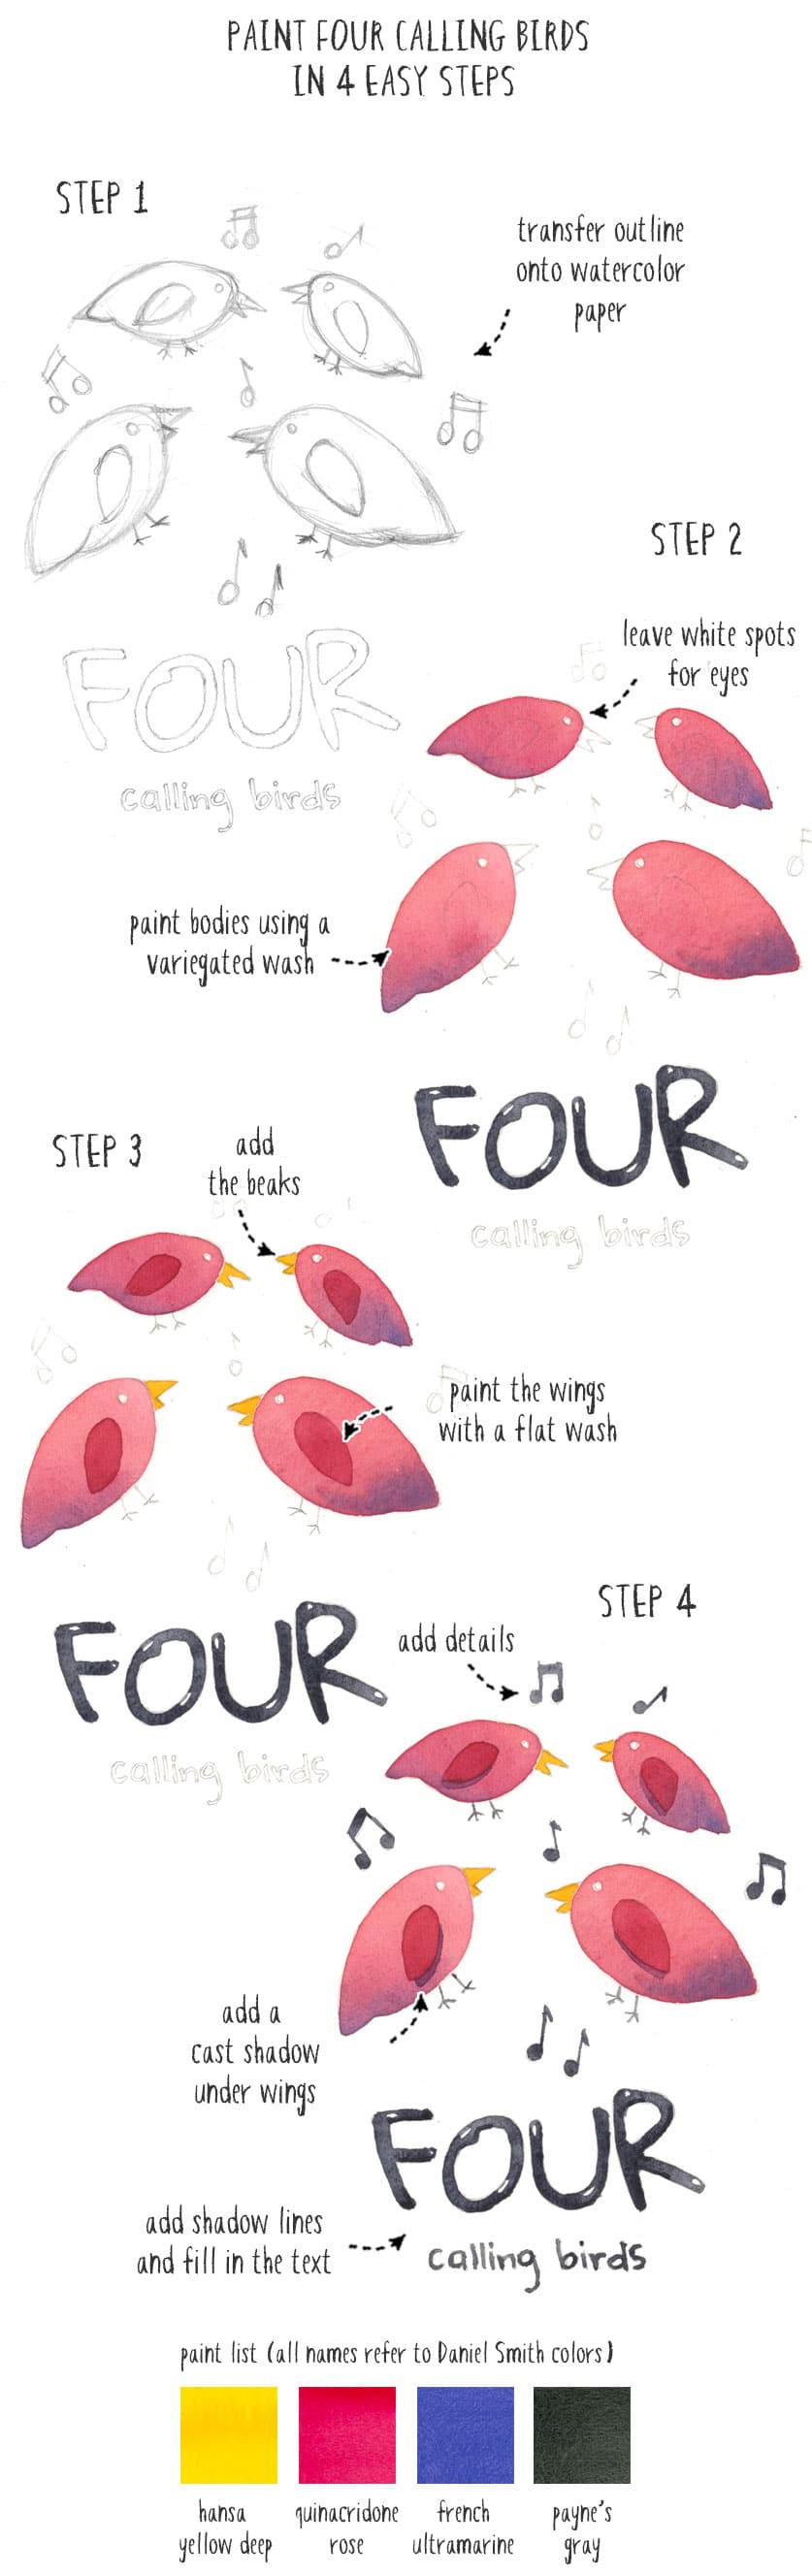 four calling birds 4 step painting process